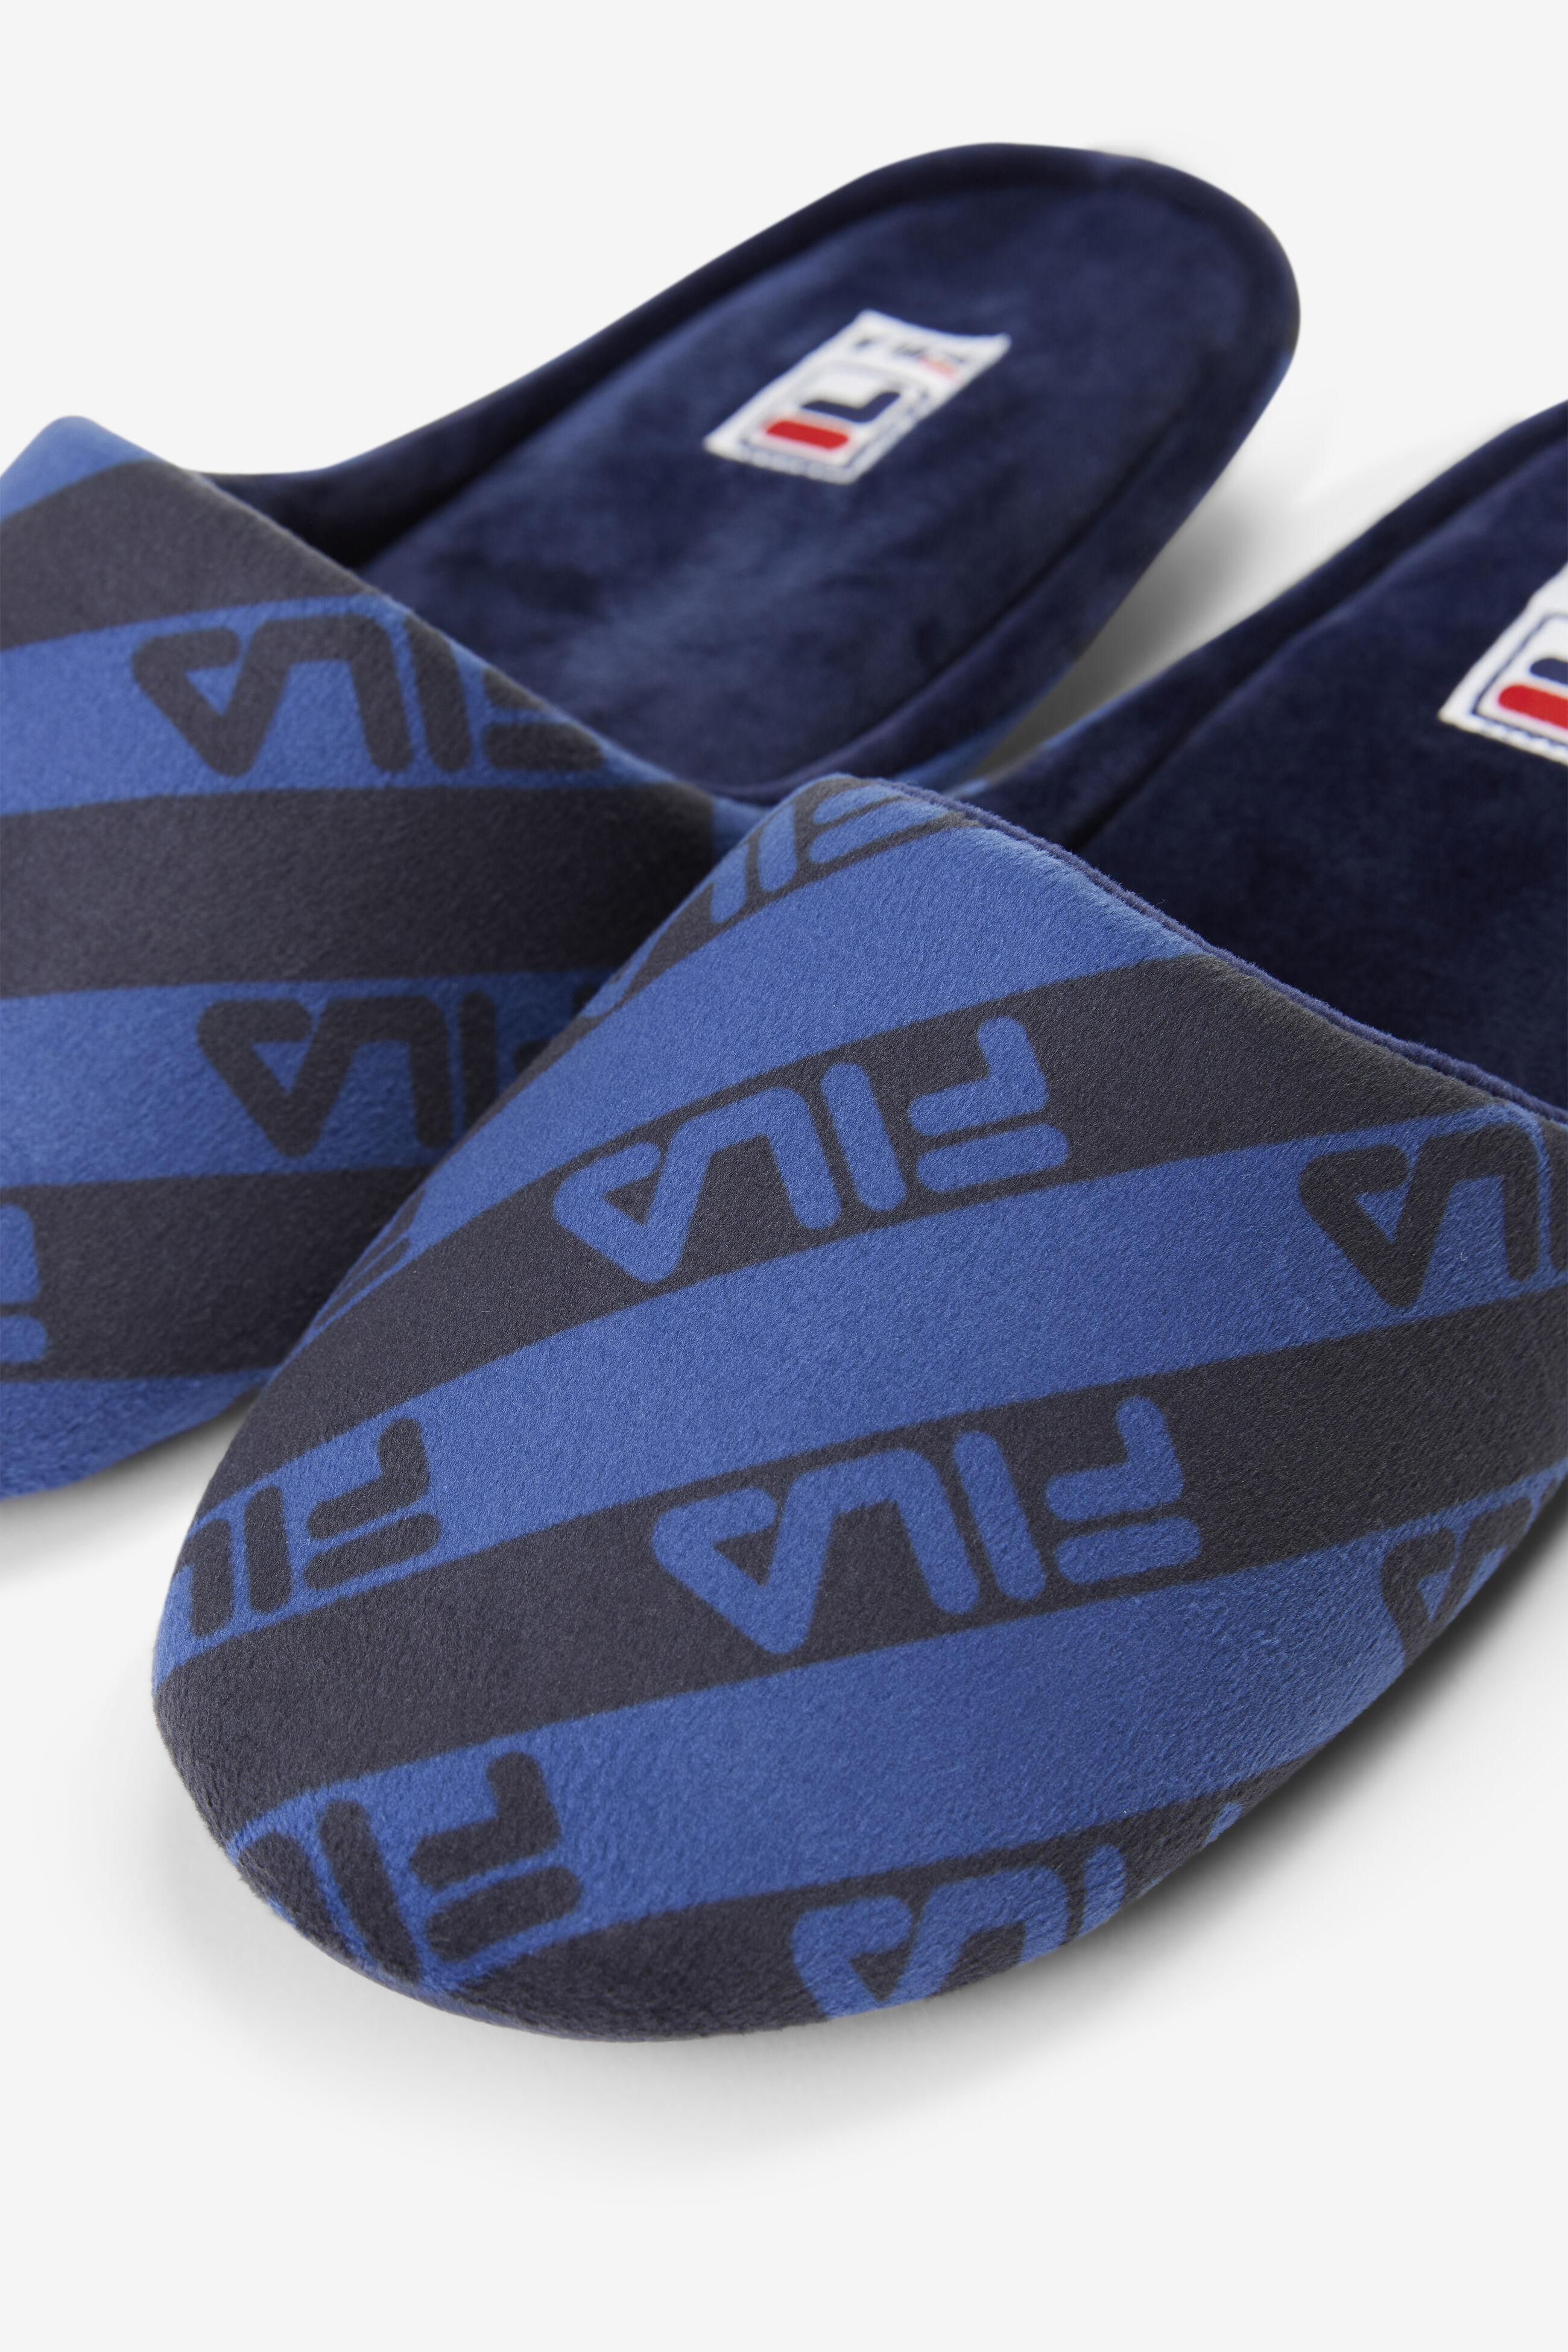 Top more than 150 fila slippers blue best